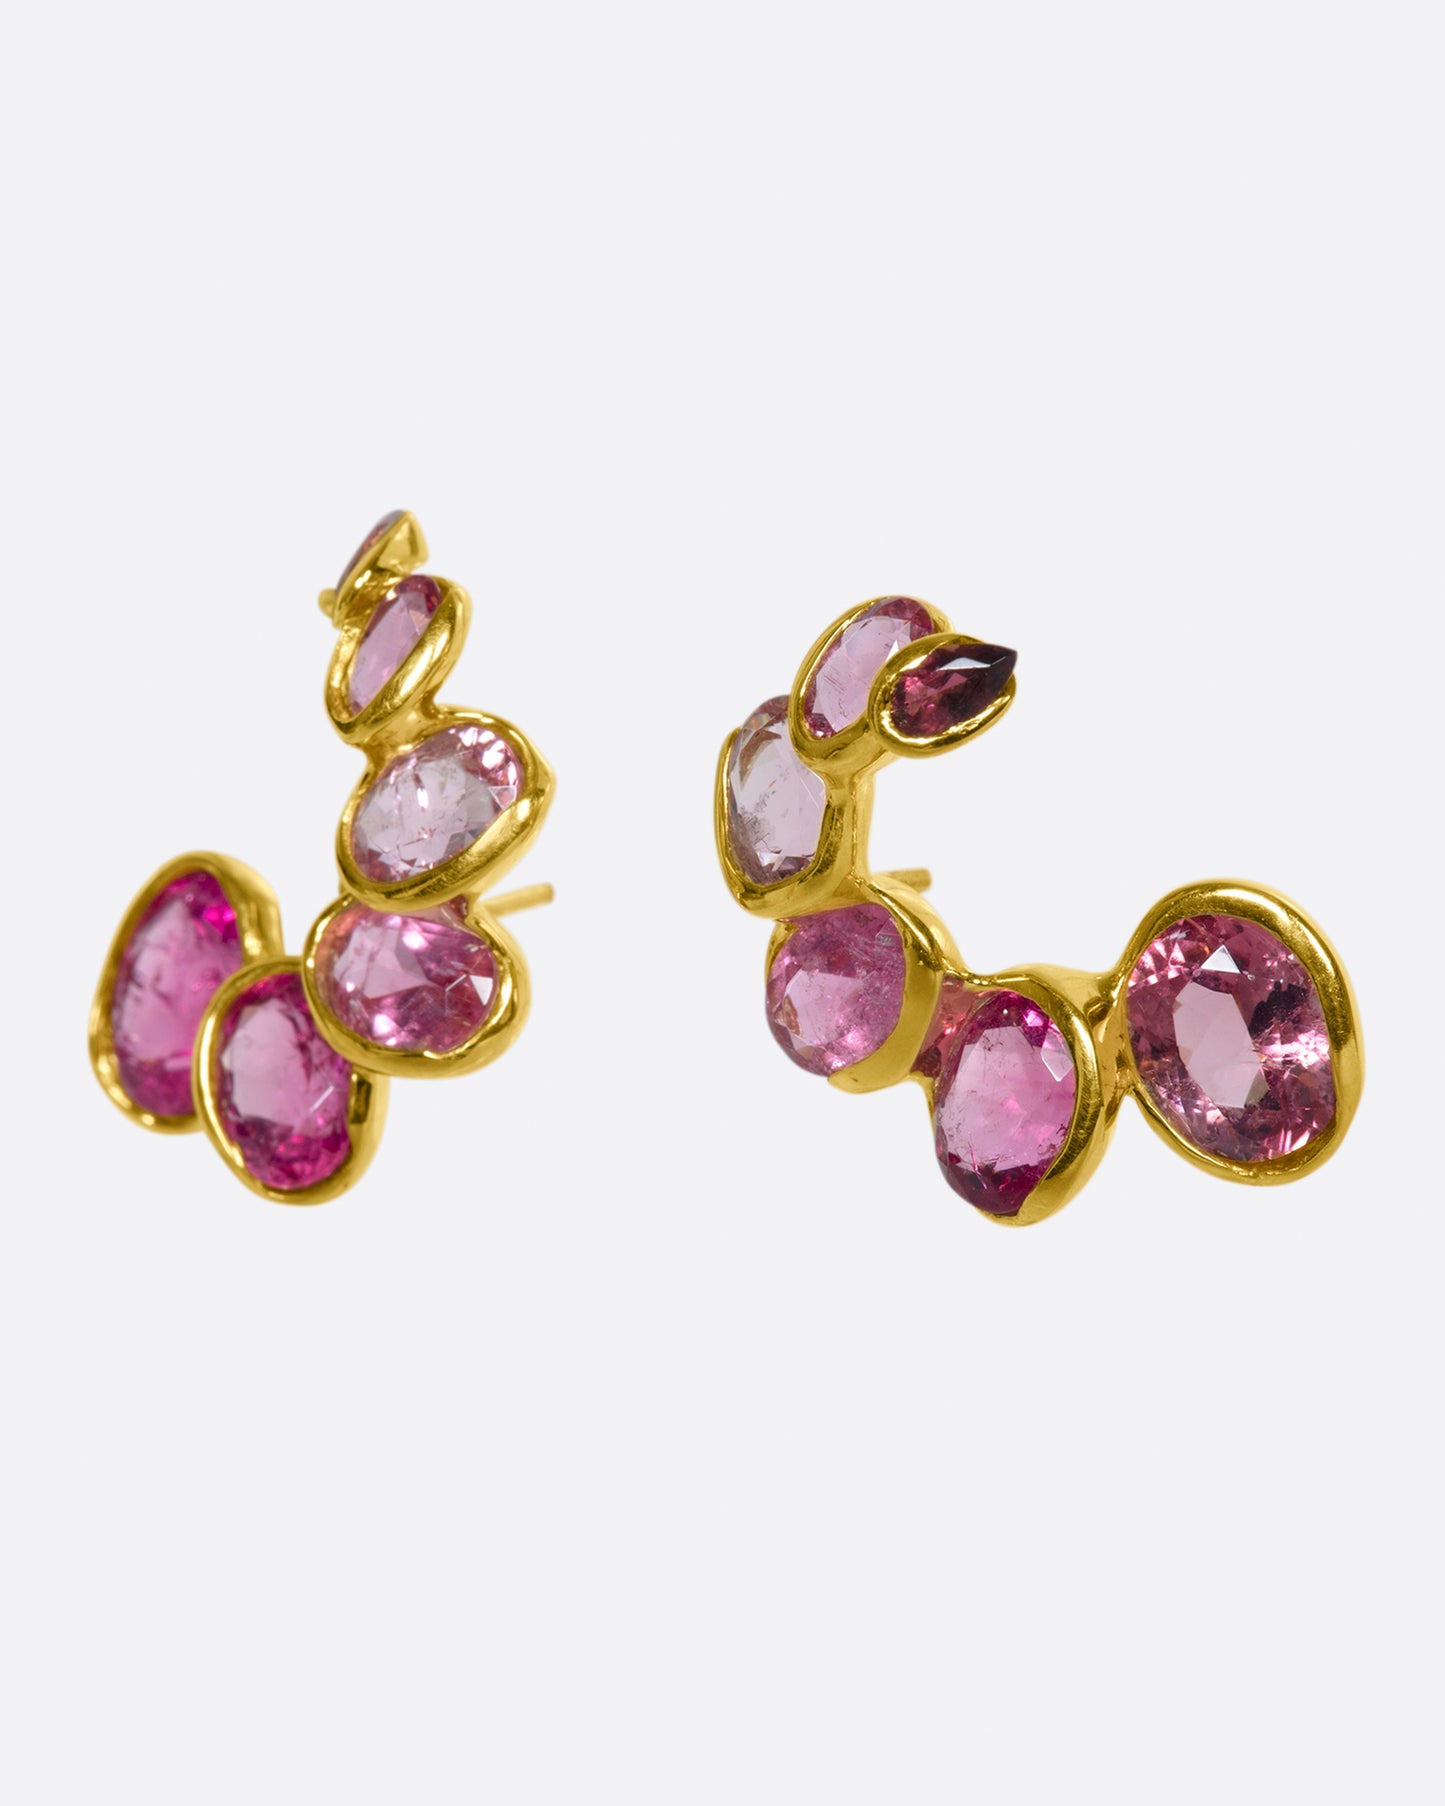 A pair of curved earrings with ombré pink tourmalines, shown from the side.